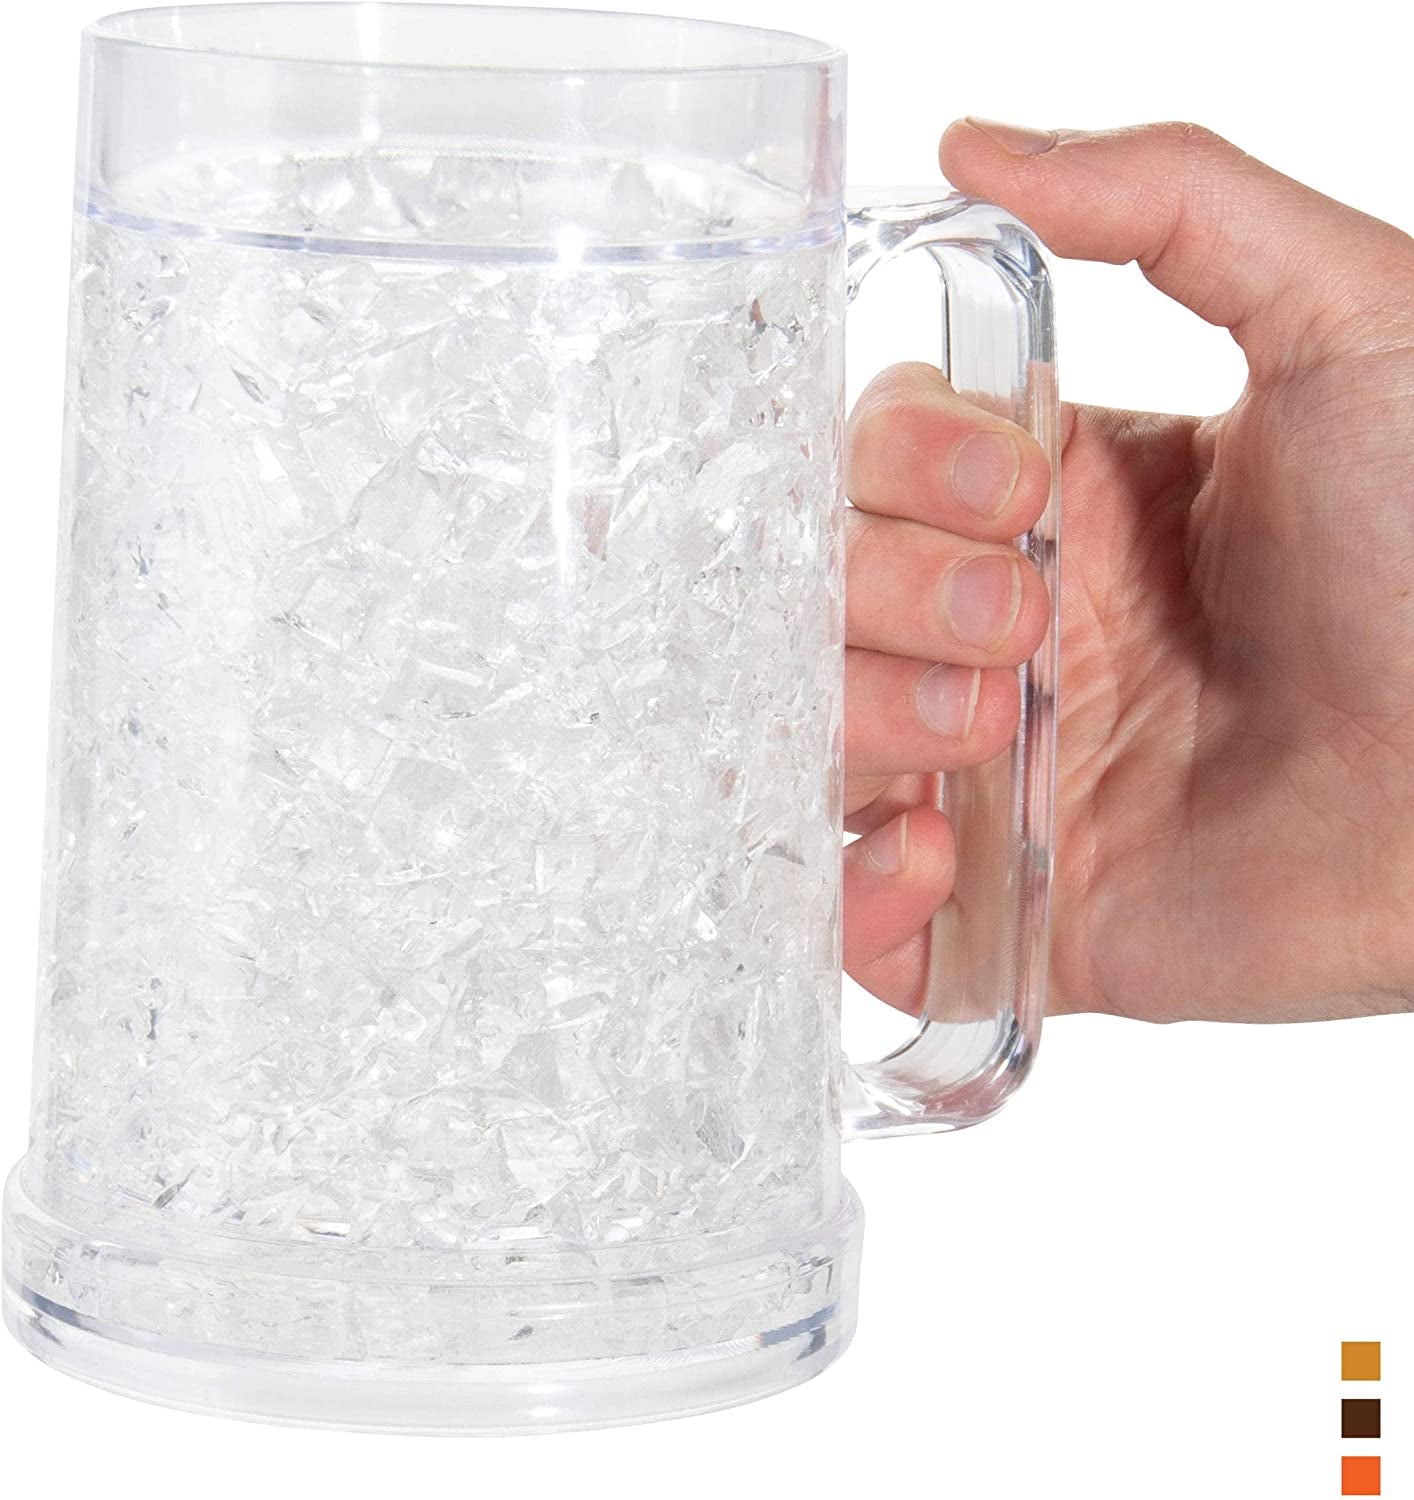 Freezer Mugs With Gel Beer Mugs For Freezer - Frosted Beer Mugs